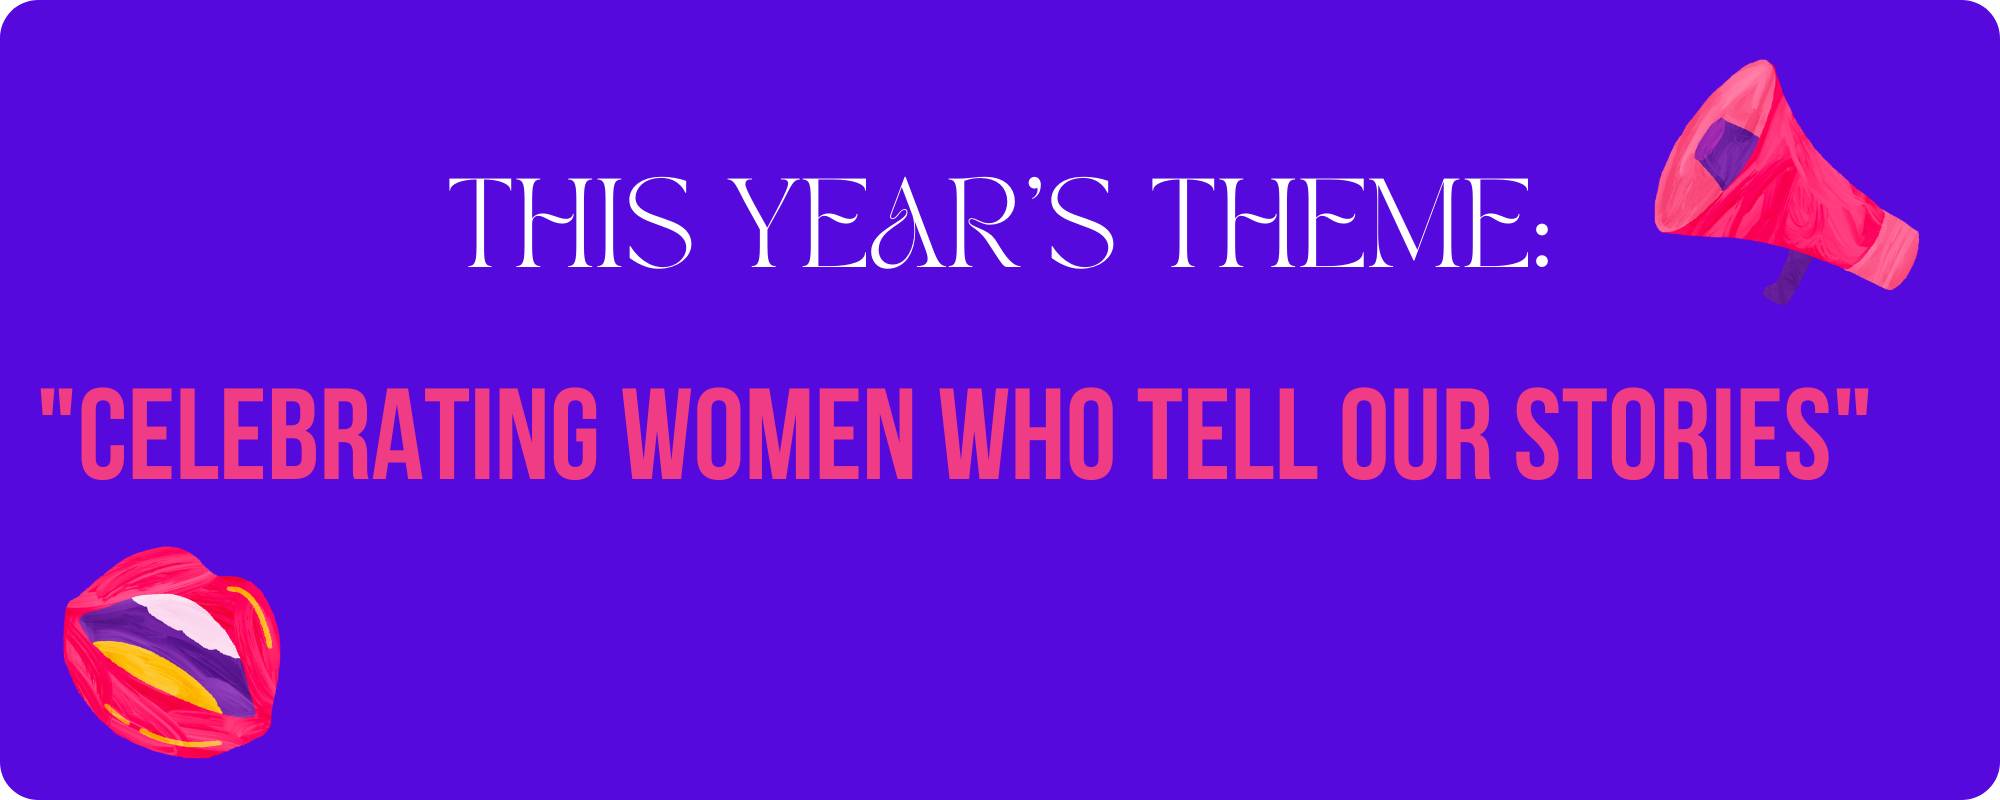 This year's theme: Celebrating Women Who Tell Our Stories